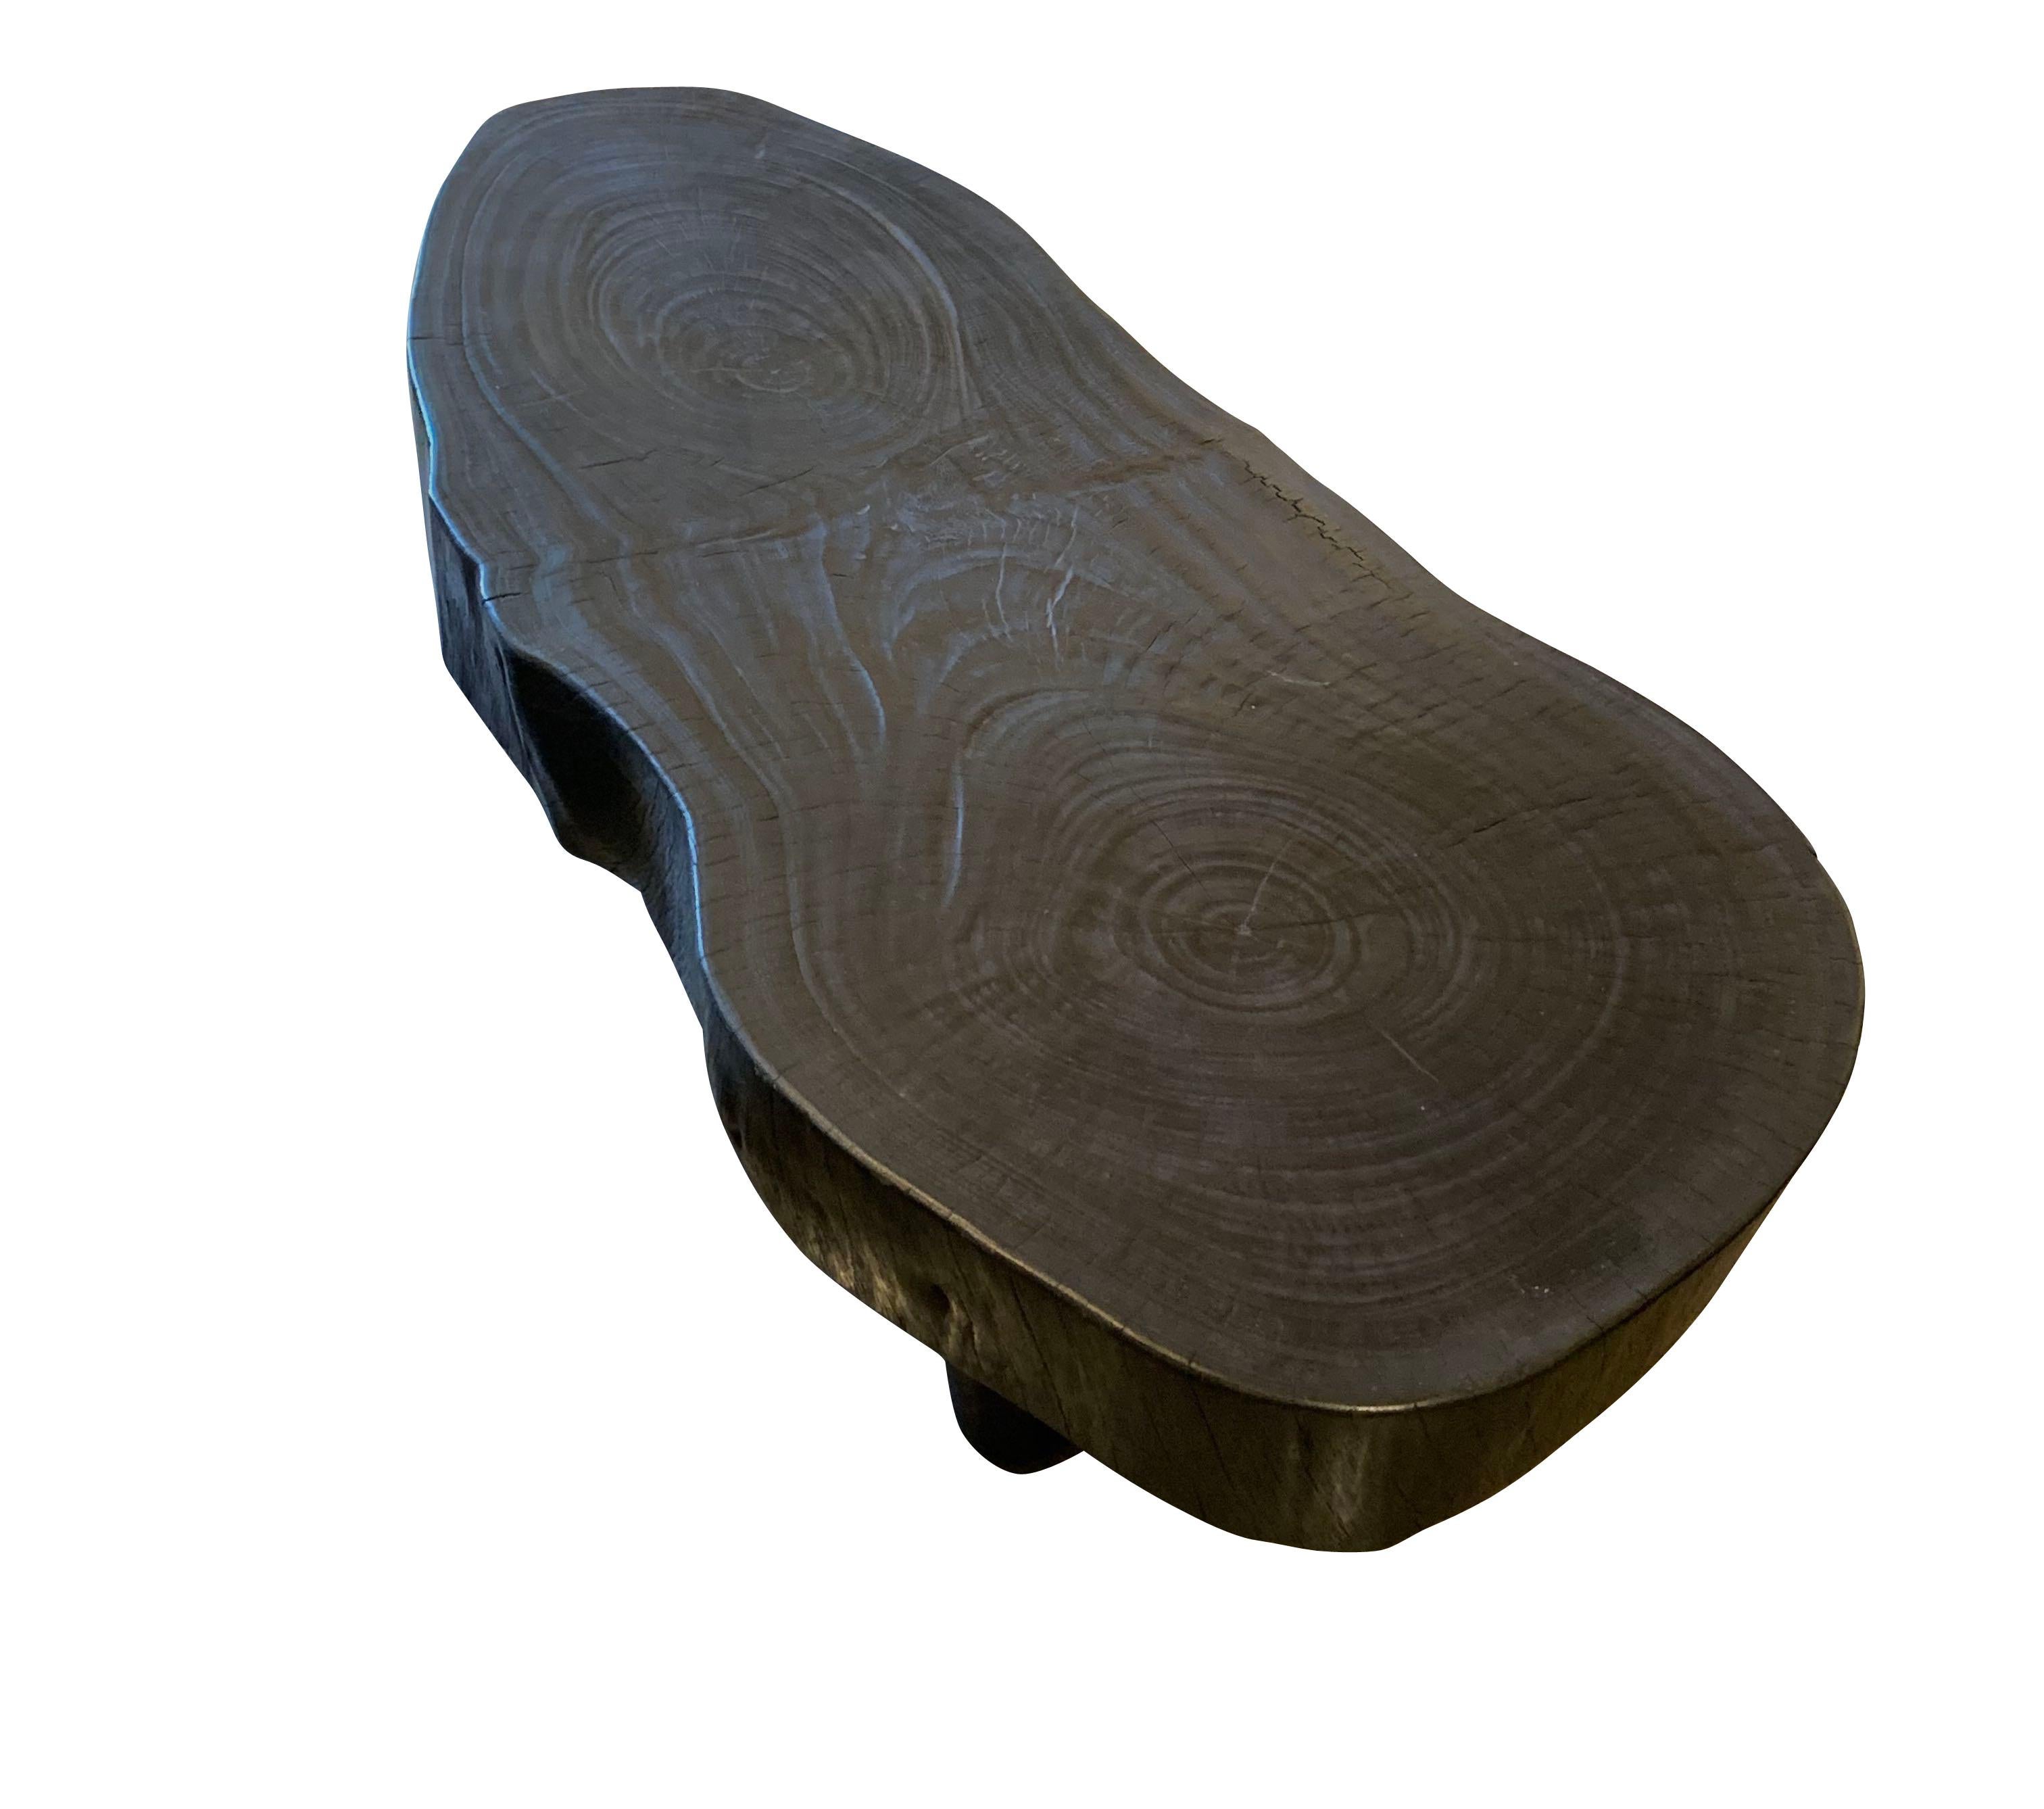 Indonesian freeform coffee table made from Suar wood that has been charred to give an ebonized appearance.
Circular rings are visible at each end of the top.
Suar wood is known to be very durable.
Clearance space under the table is 10